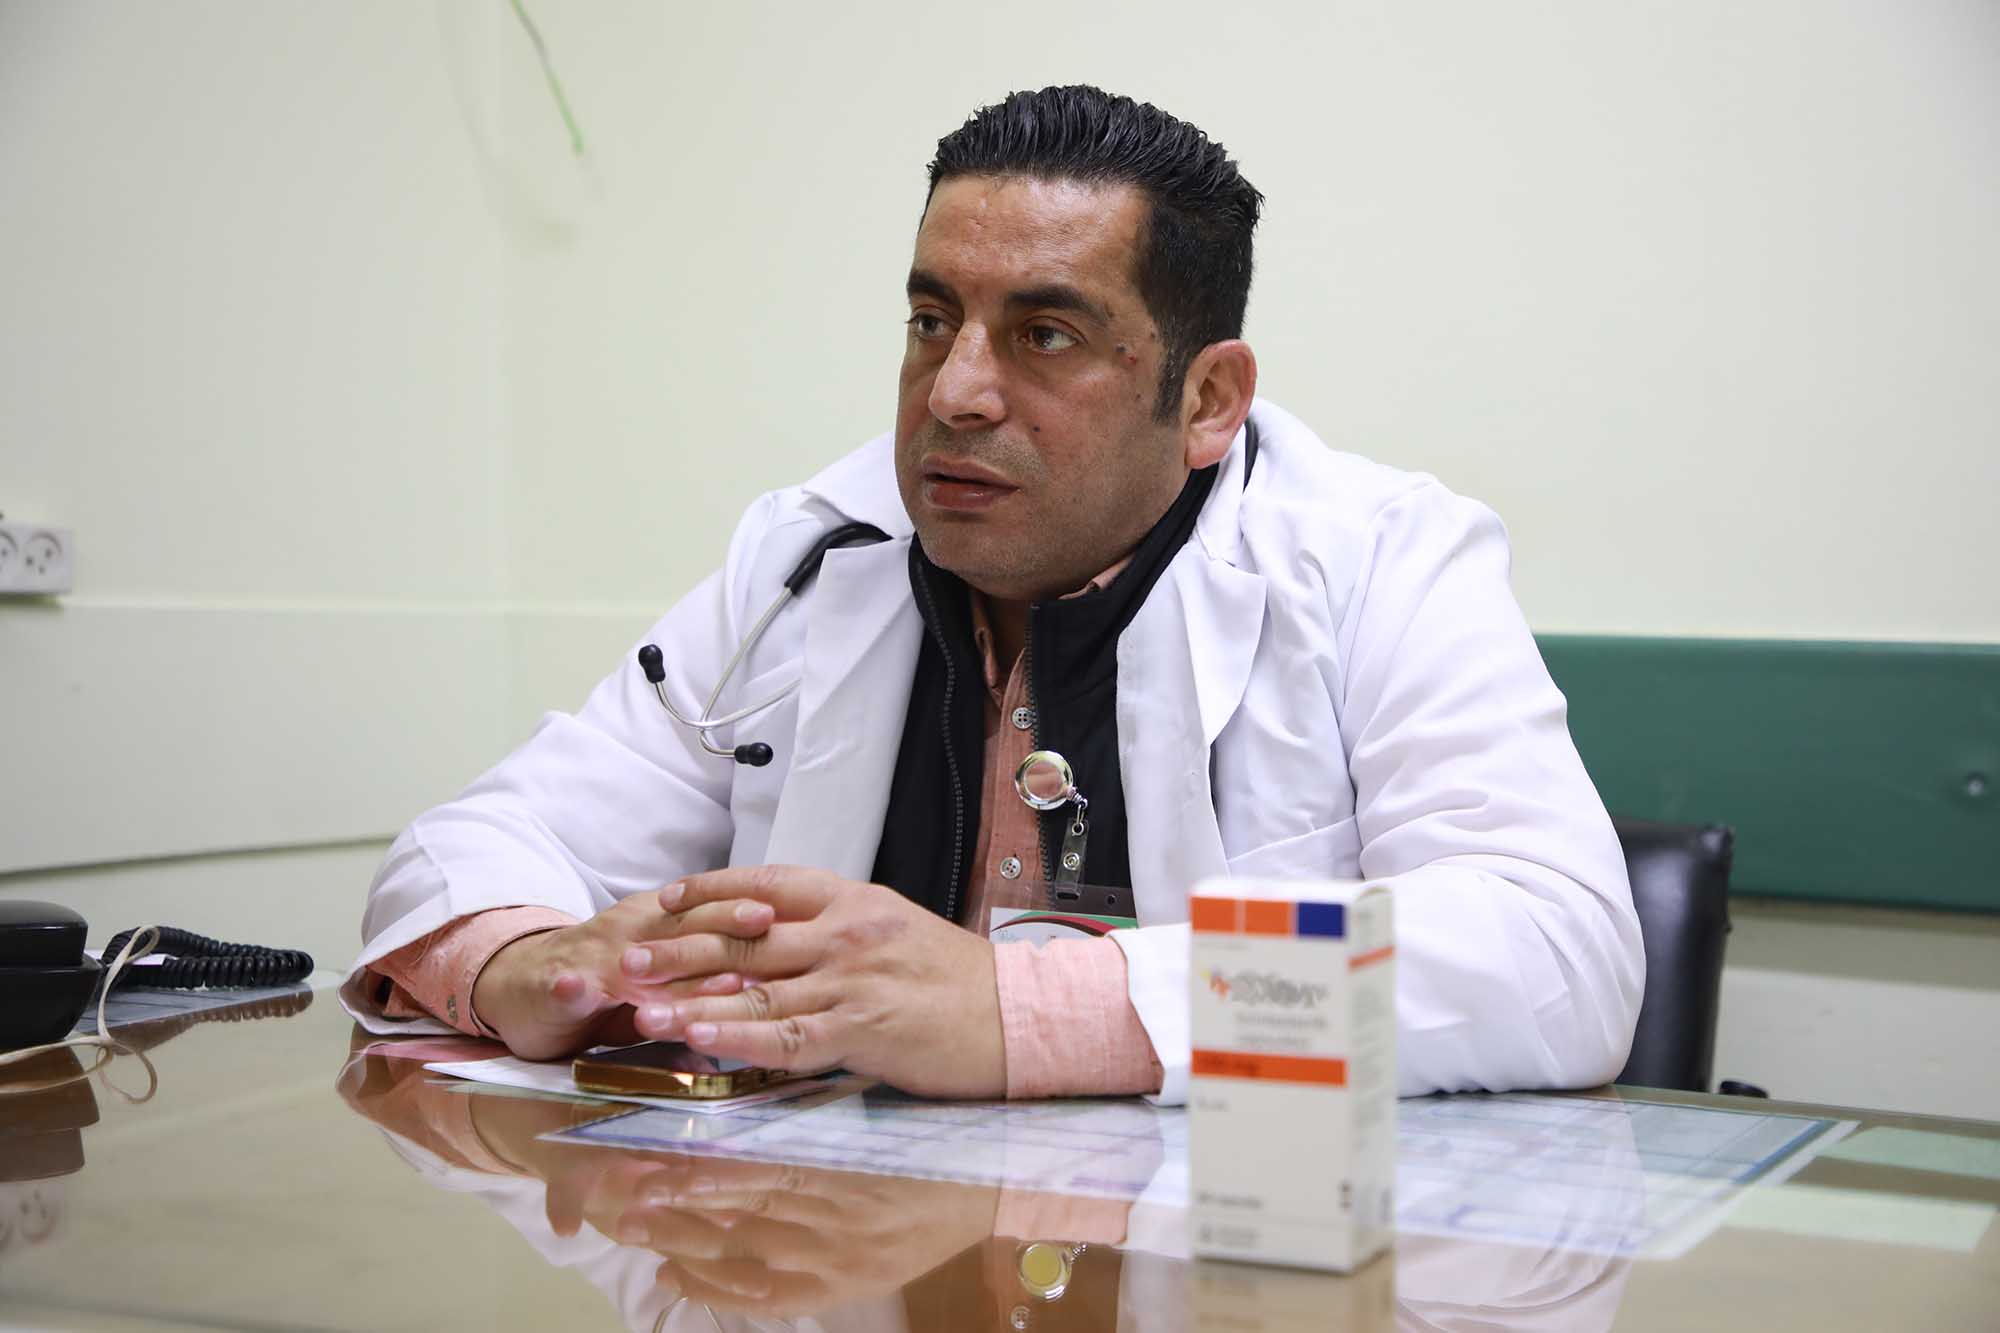 Dr. Shadi Awad is a pulmonologist and head of the lung endoscopy unit at Al-Shifa Medical Hospital in Gaza.